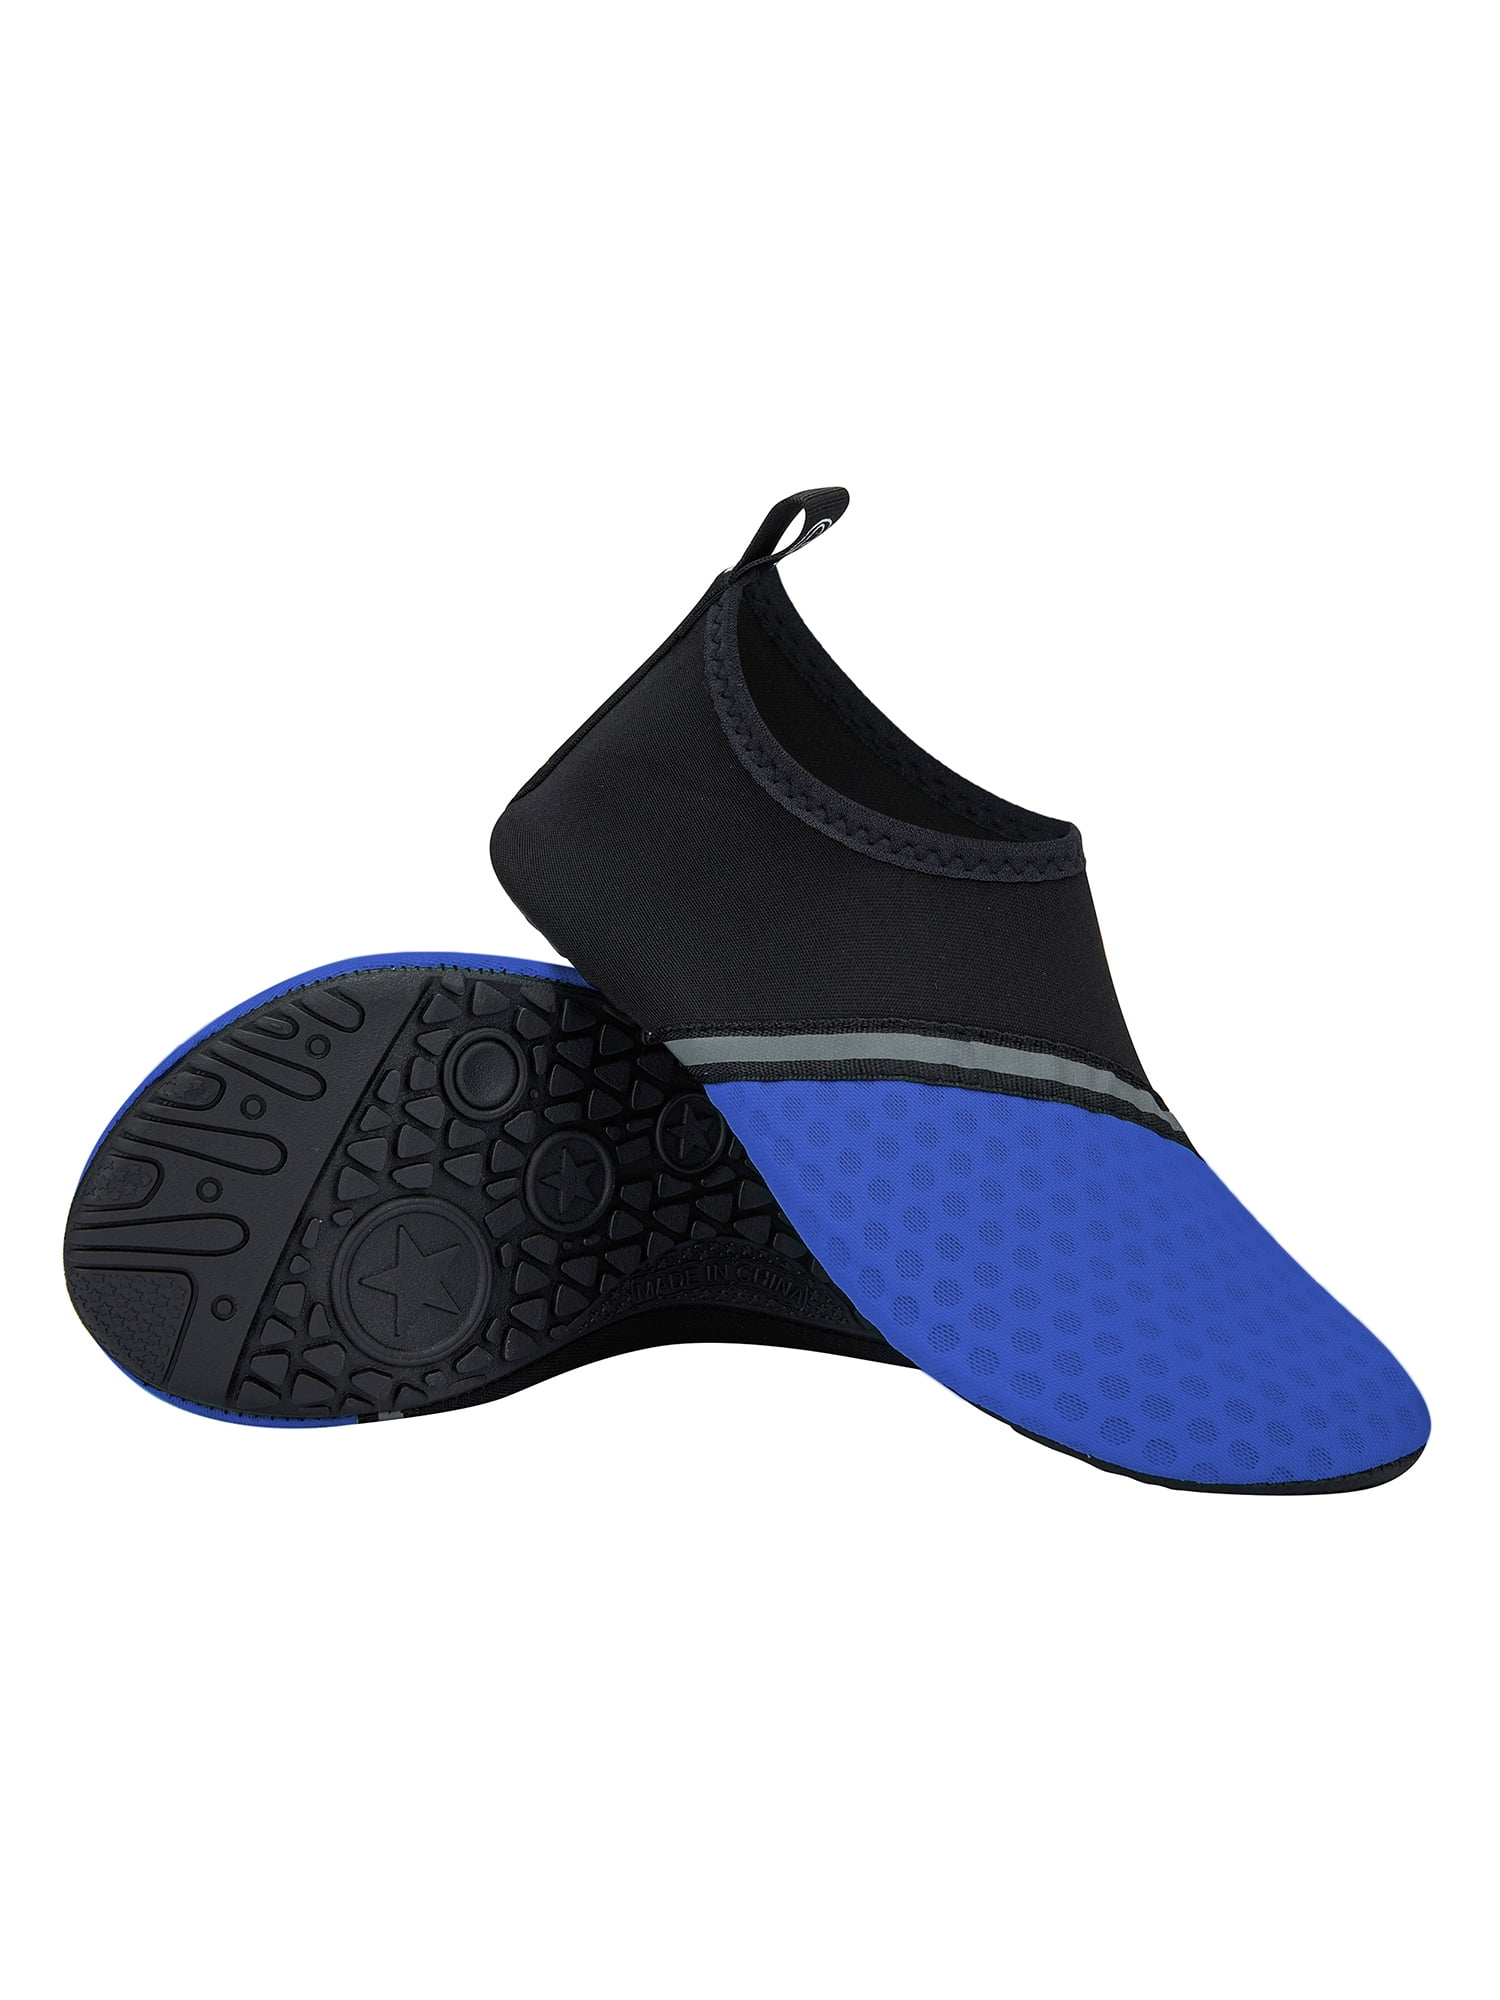 Details about   Water Skin Shoes Barefoot Quick-Dry Aqua Socks for Beach Swim Surf Yoga Exercise 